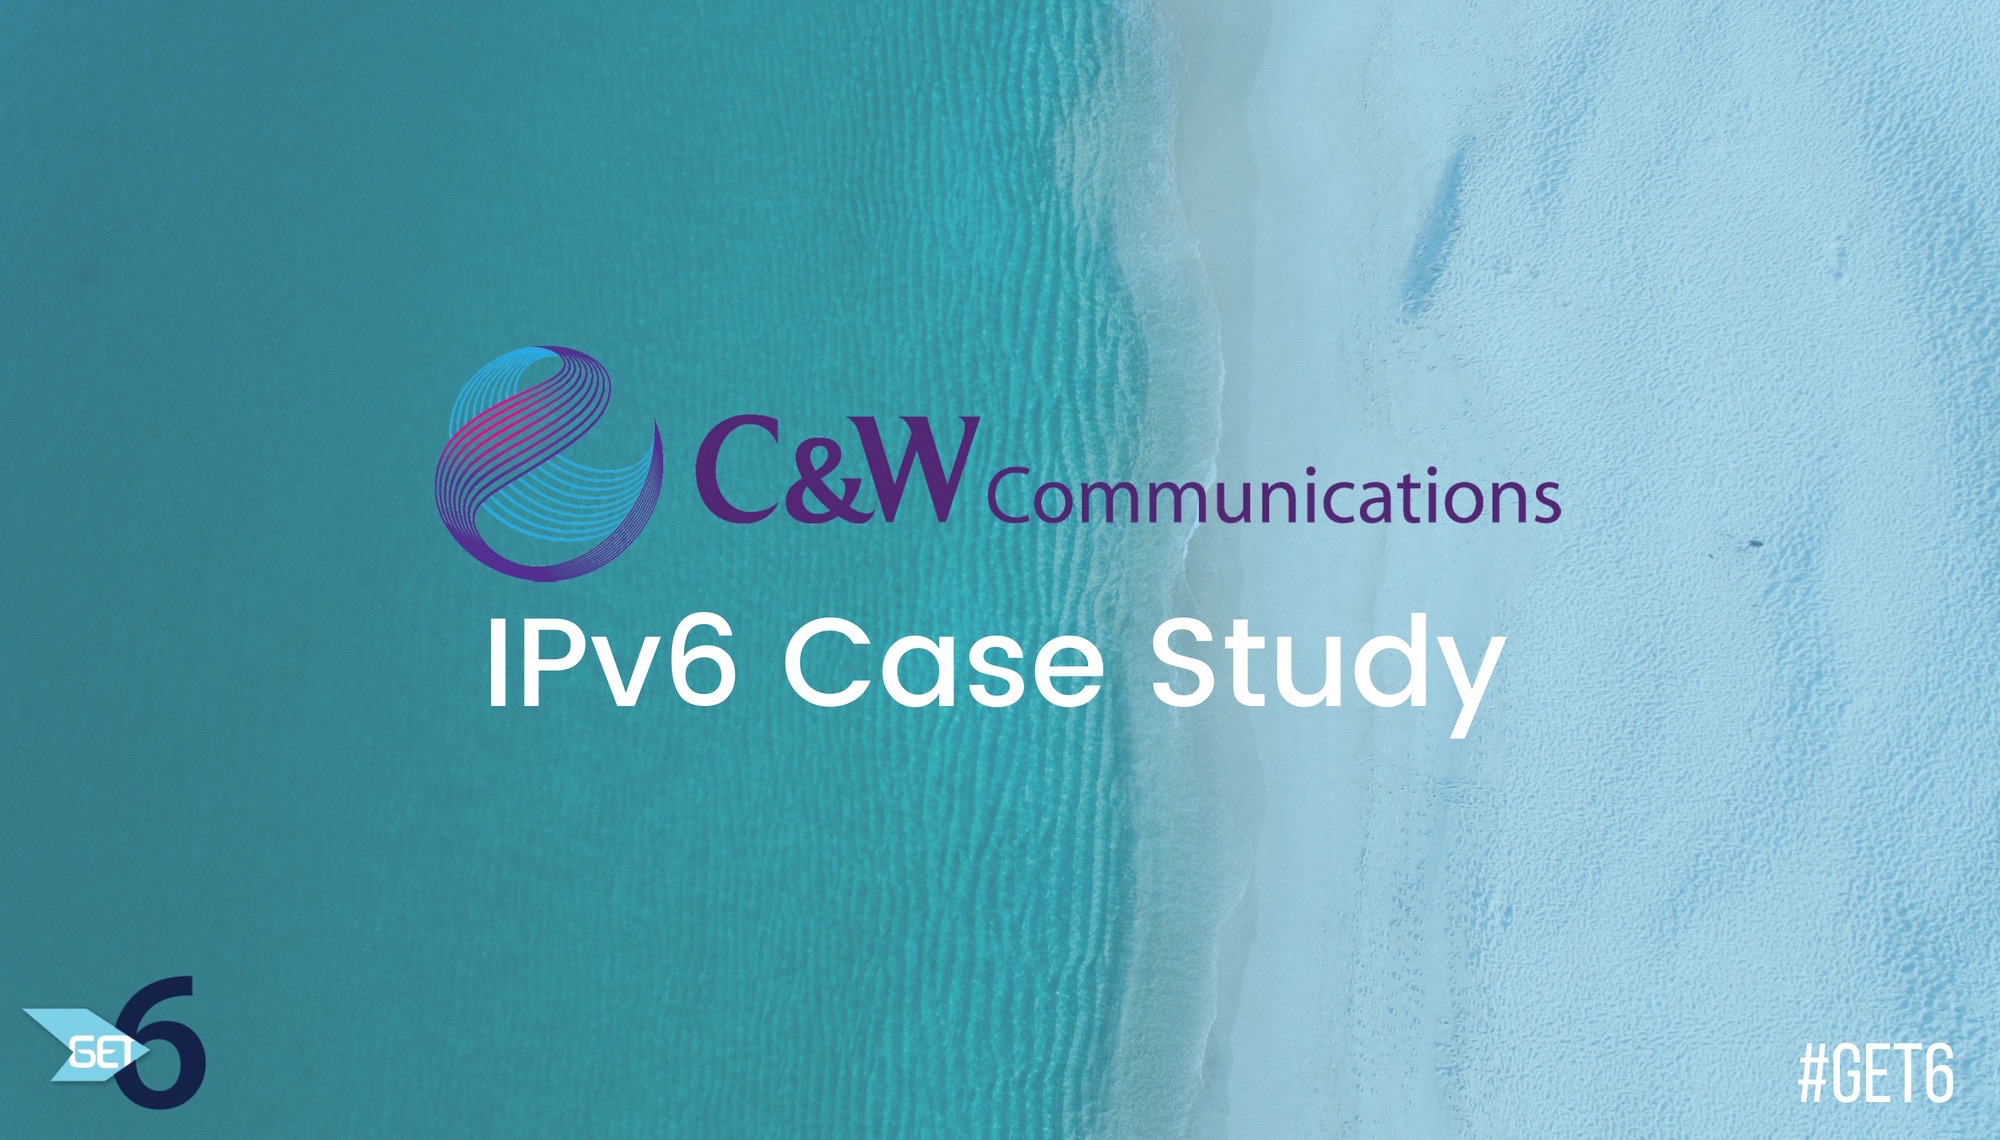 Enabling Internet Access Services over IPv6 in the Caribbean